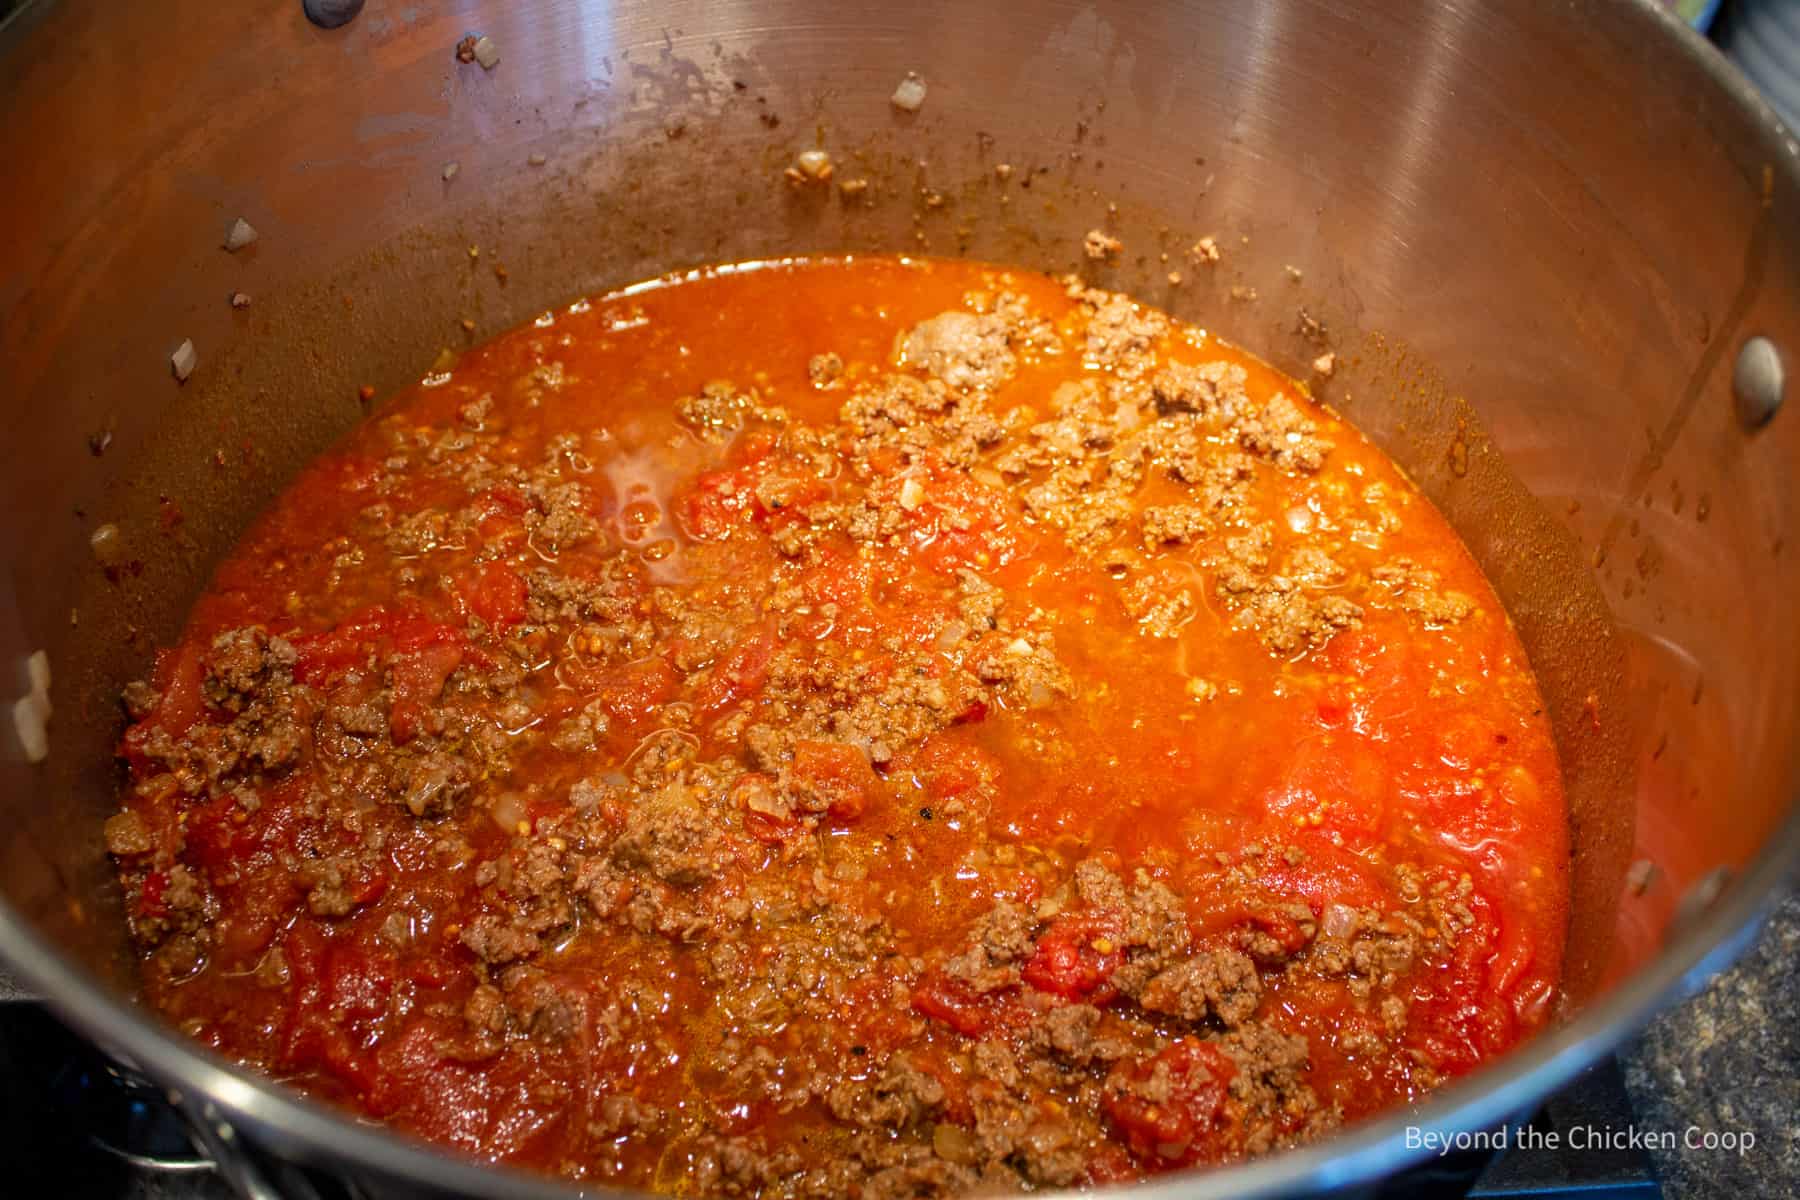 Tomato sauce with cooked burger.